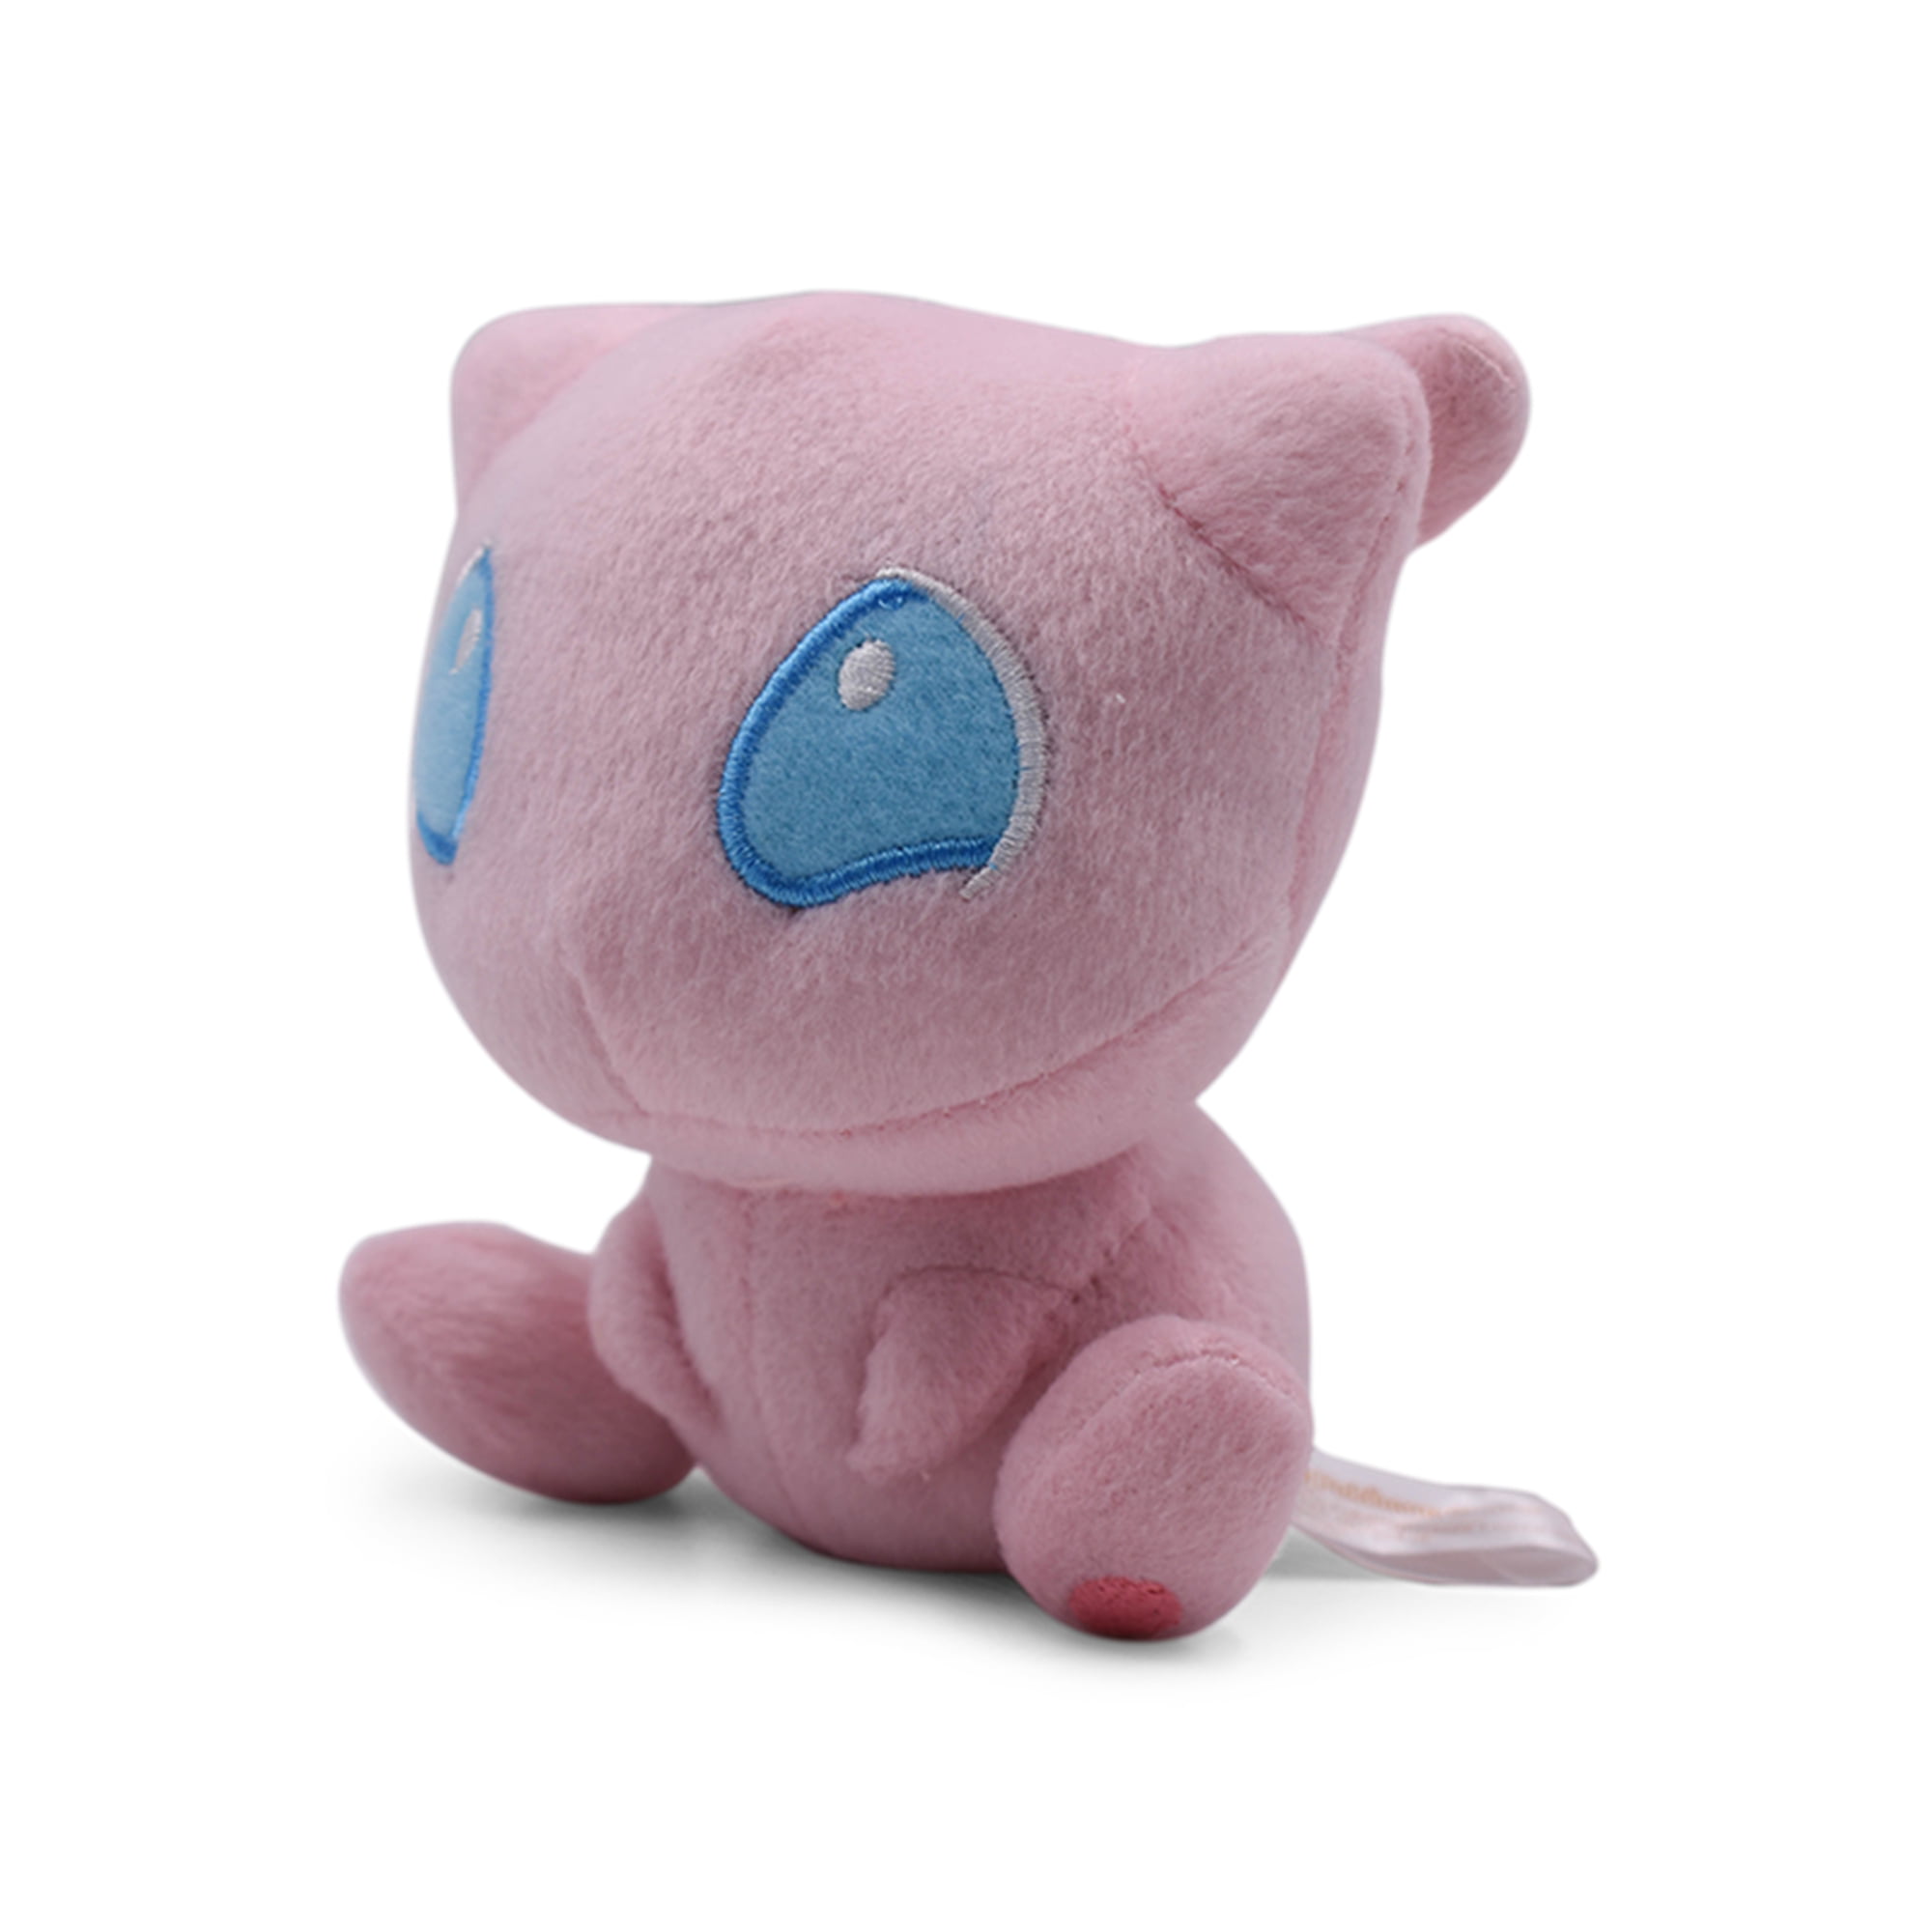 Official Licensed Winking Mew Pokemon Plush Toys Soft Stuffed Doll